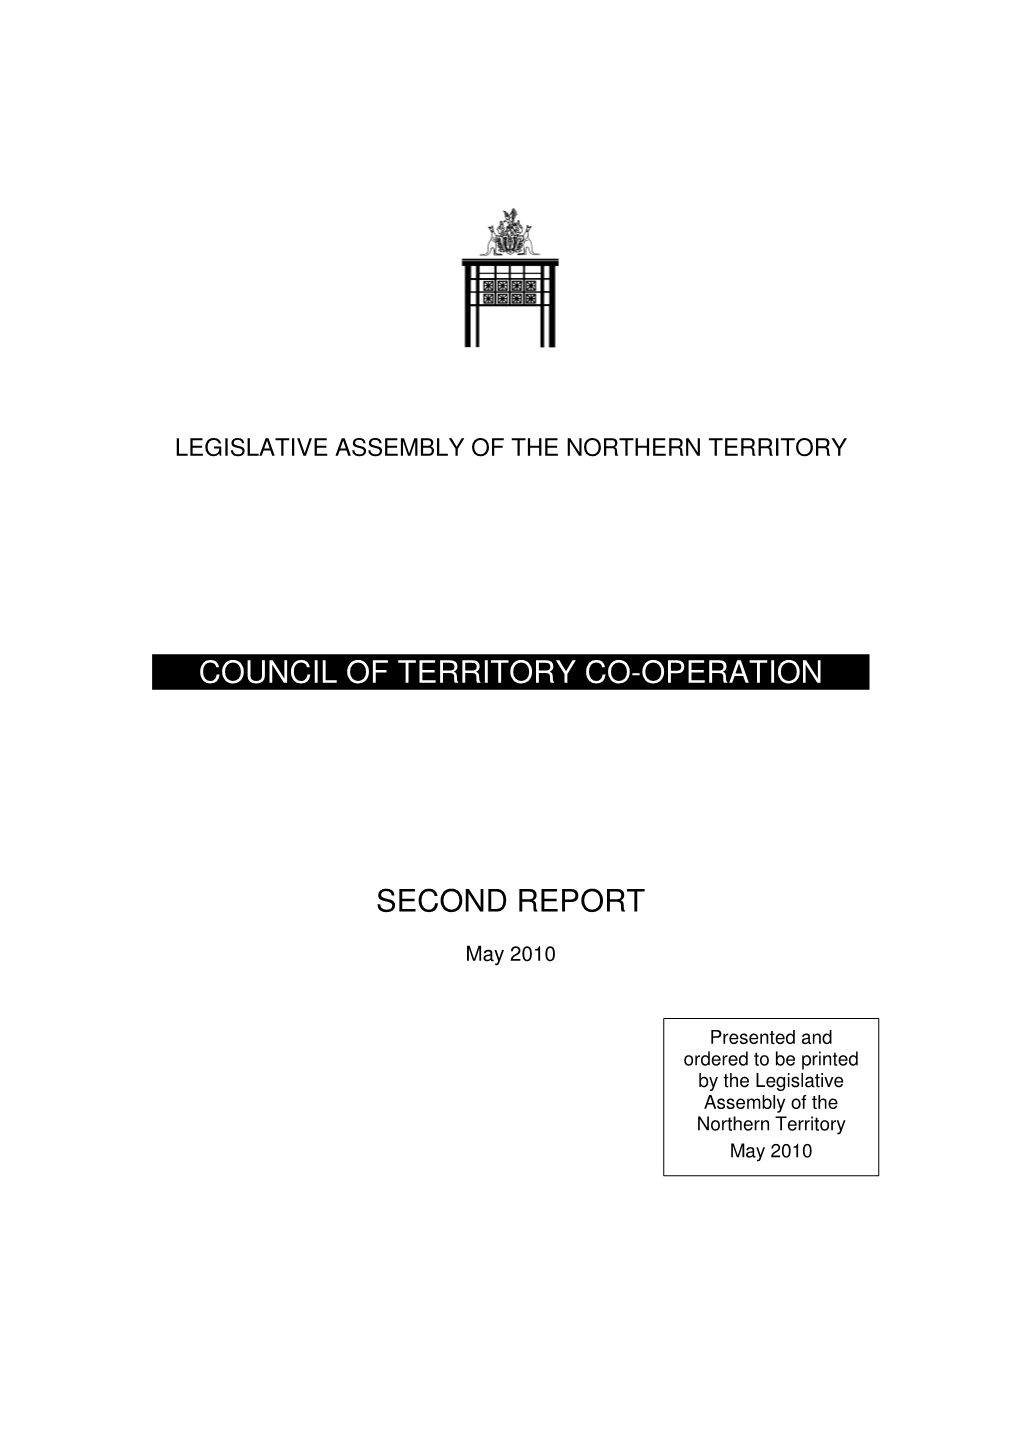 Council of Territory Co-Operation Second Report